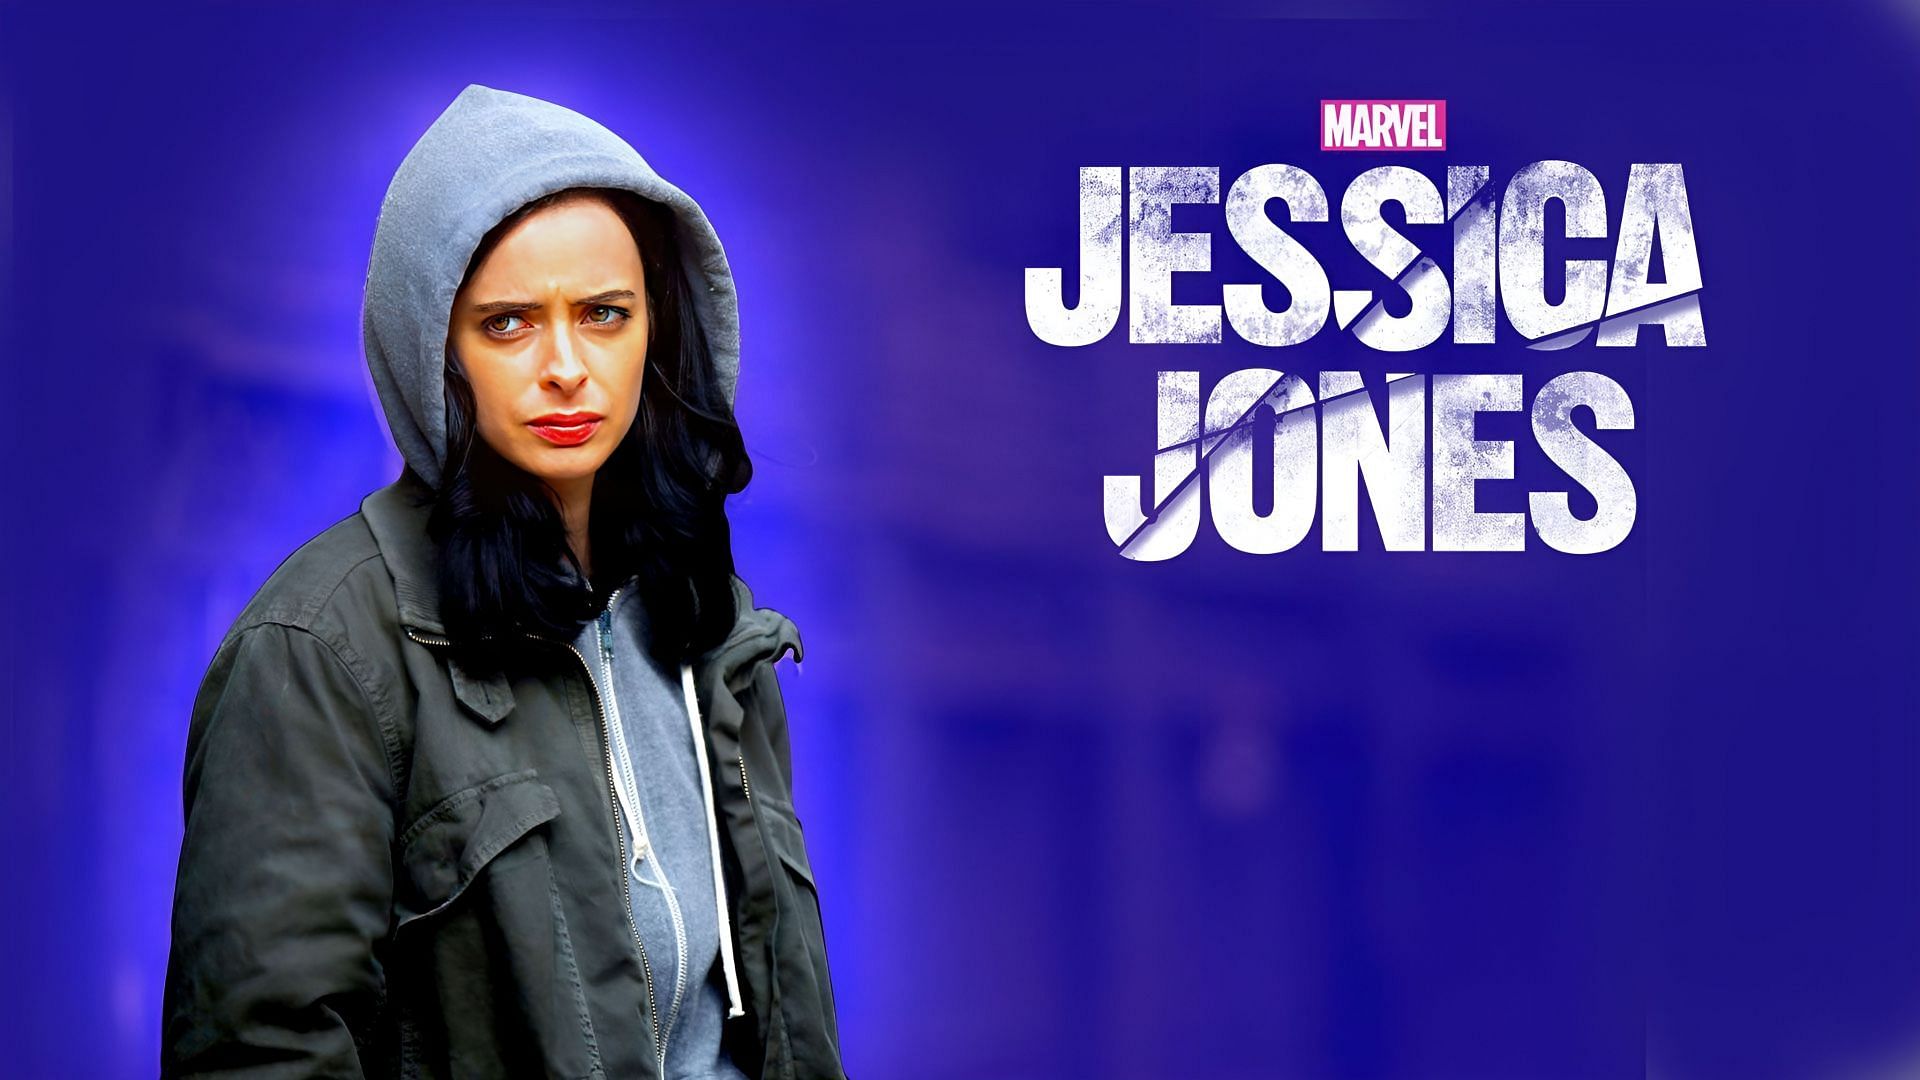 Jessica Jones is no ordinary superhero; she stands as a shining example of courage and dedication.(Image via Marvel)